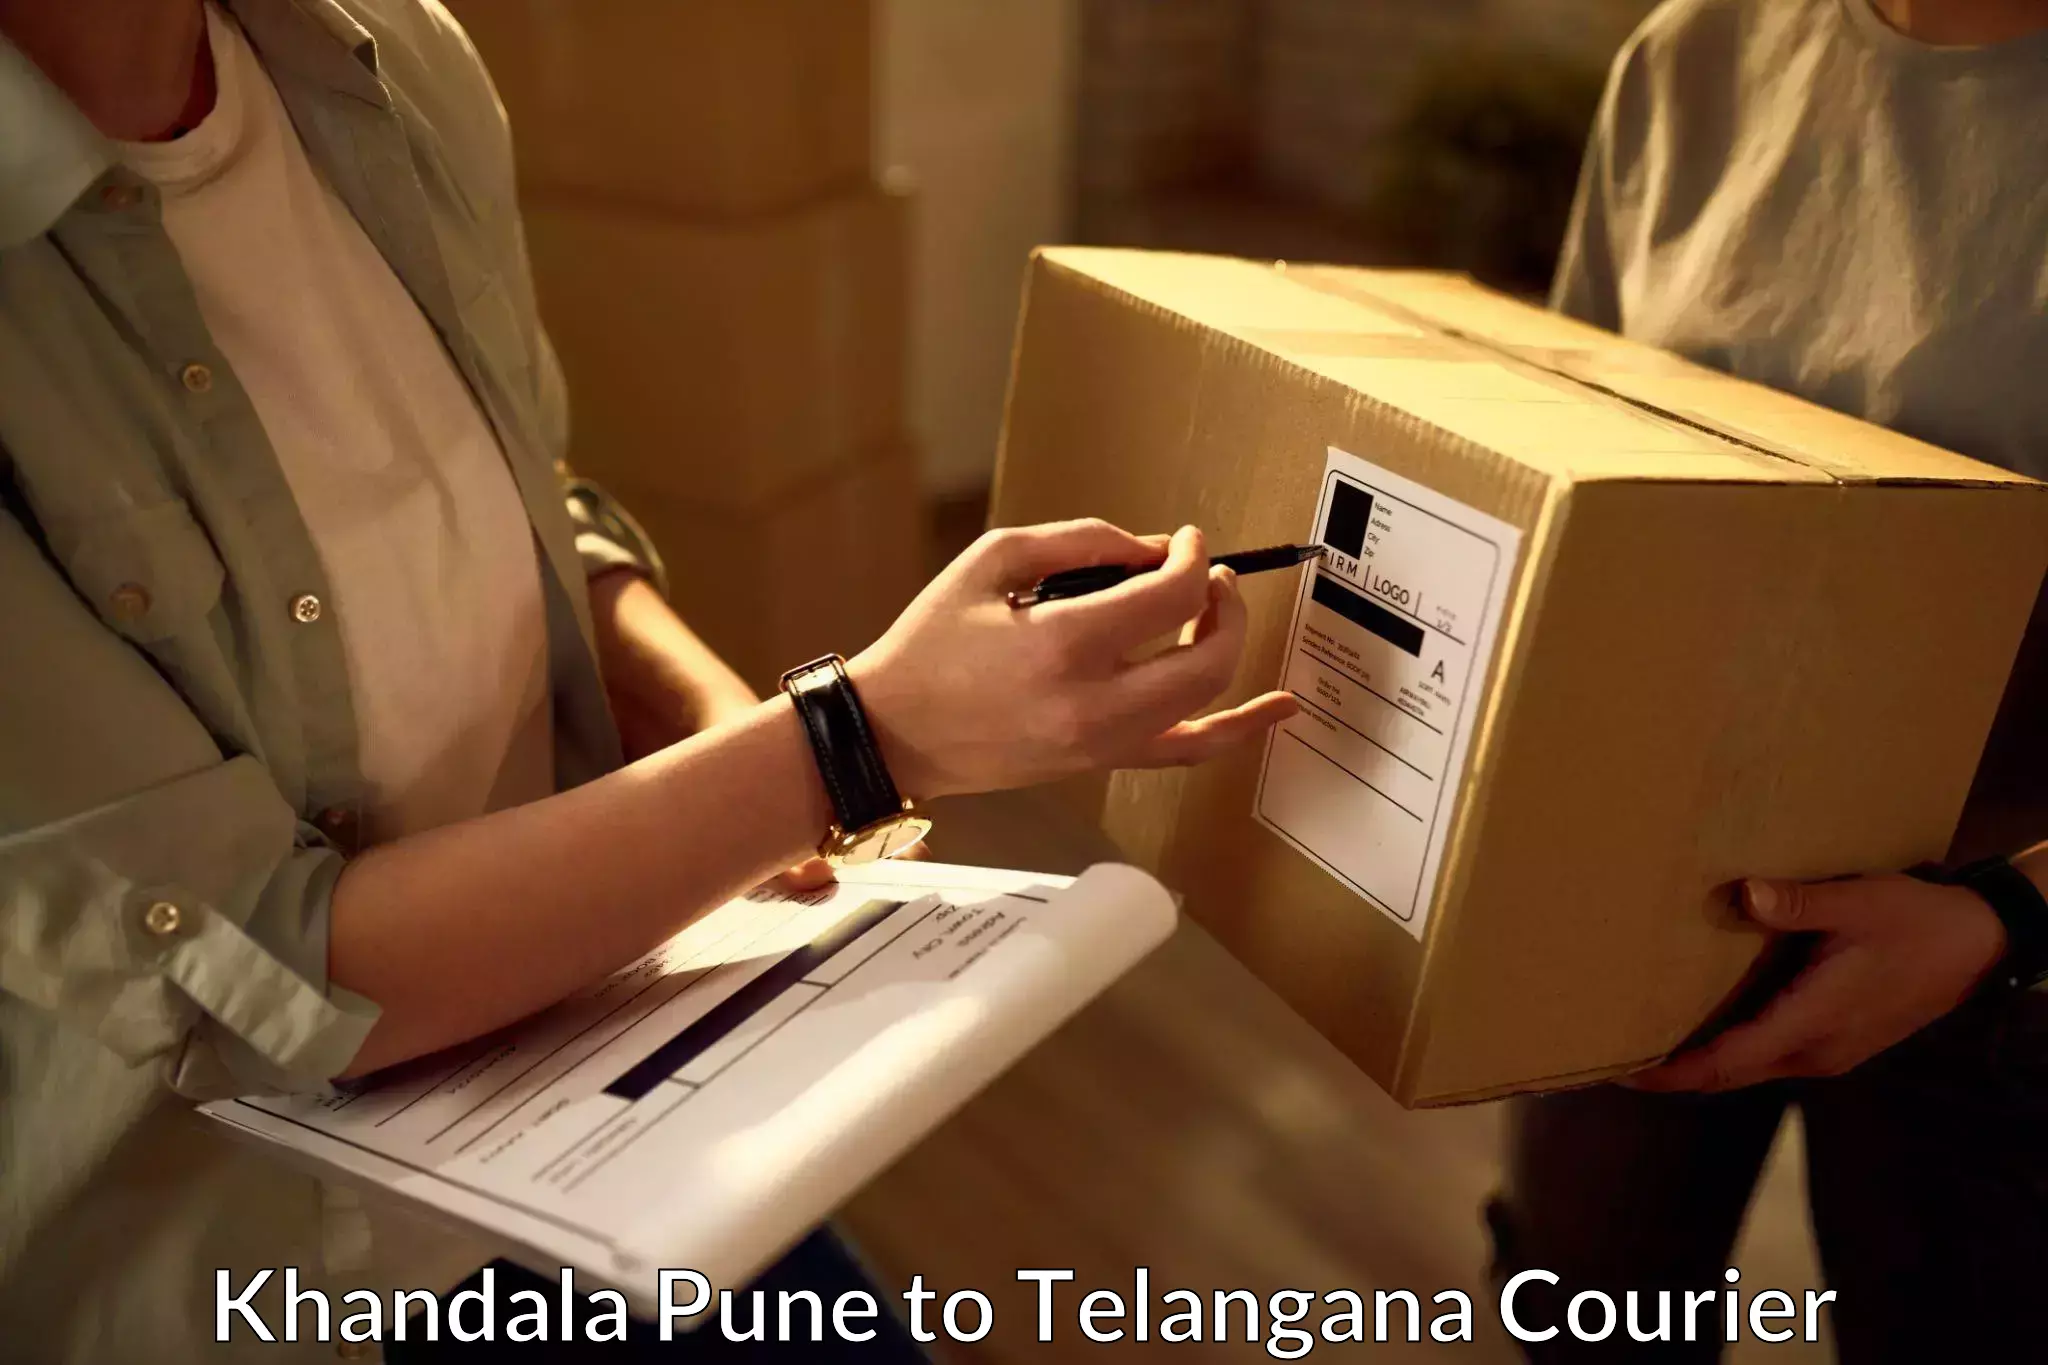 Nationwide shipping services Khandala Pune to Manneguda